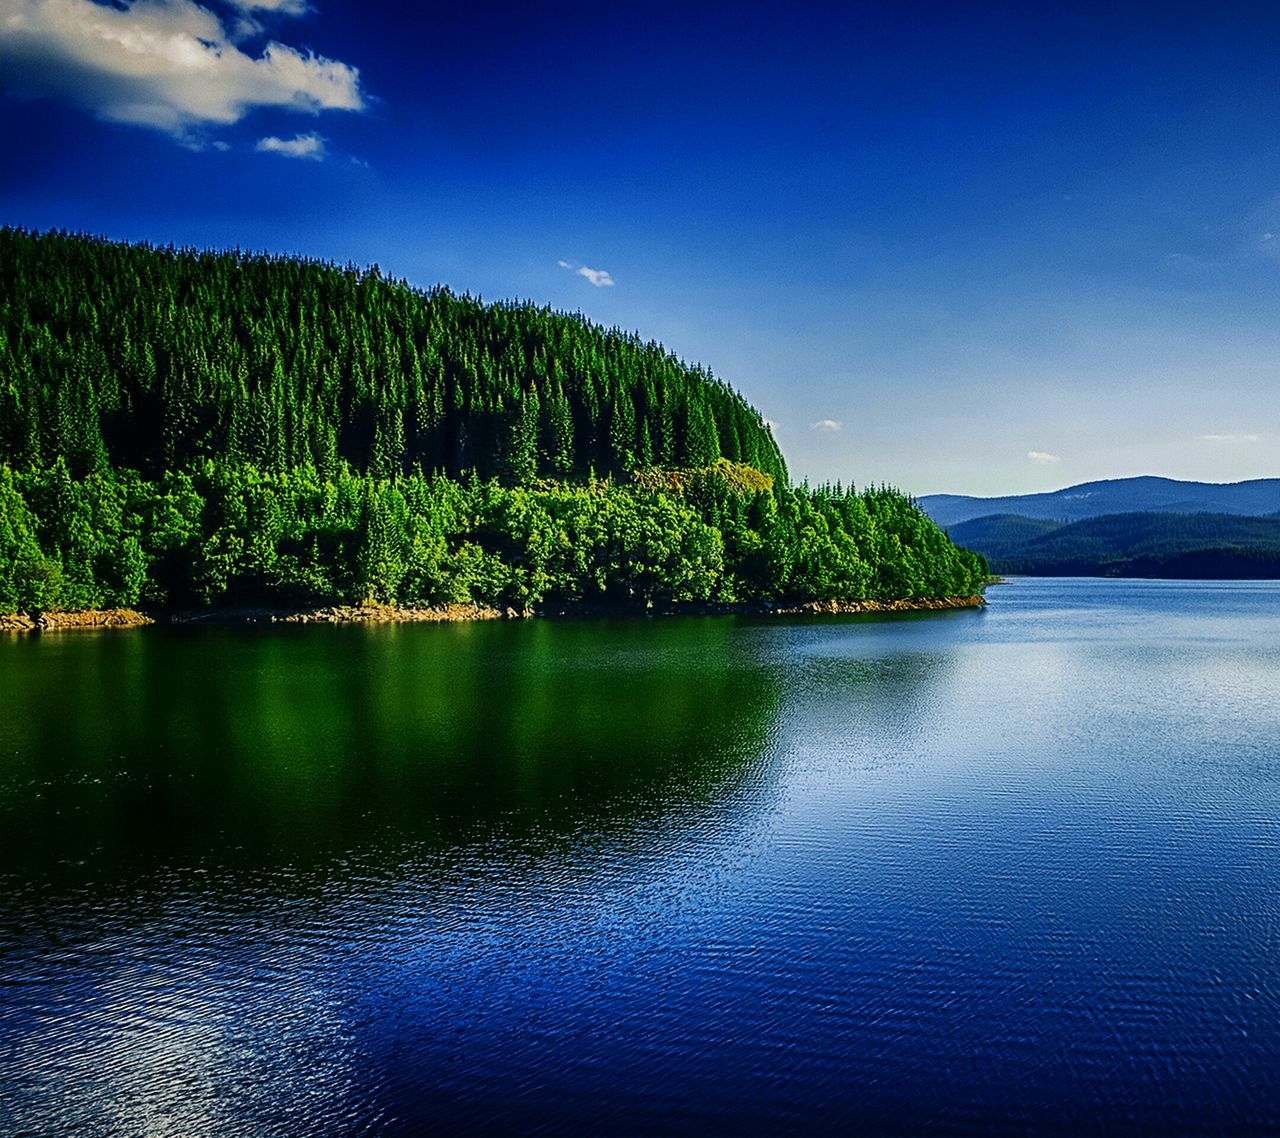 tranquil scene, water, tree, tranquility, scenics, blue, beauty in nature, nature, waterfront, lake, green color, reflection, sky, growth, idyllic, clear sky, green, day, landscape, mountain